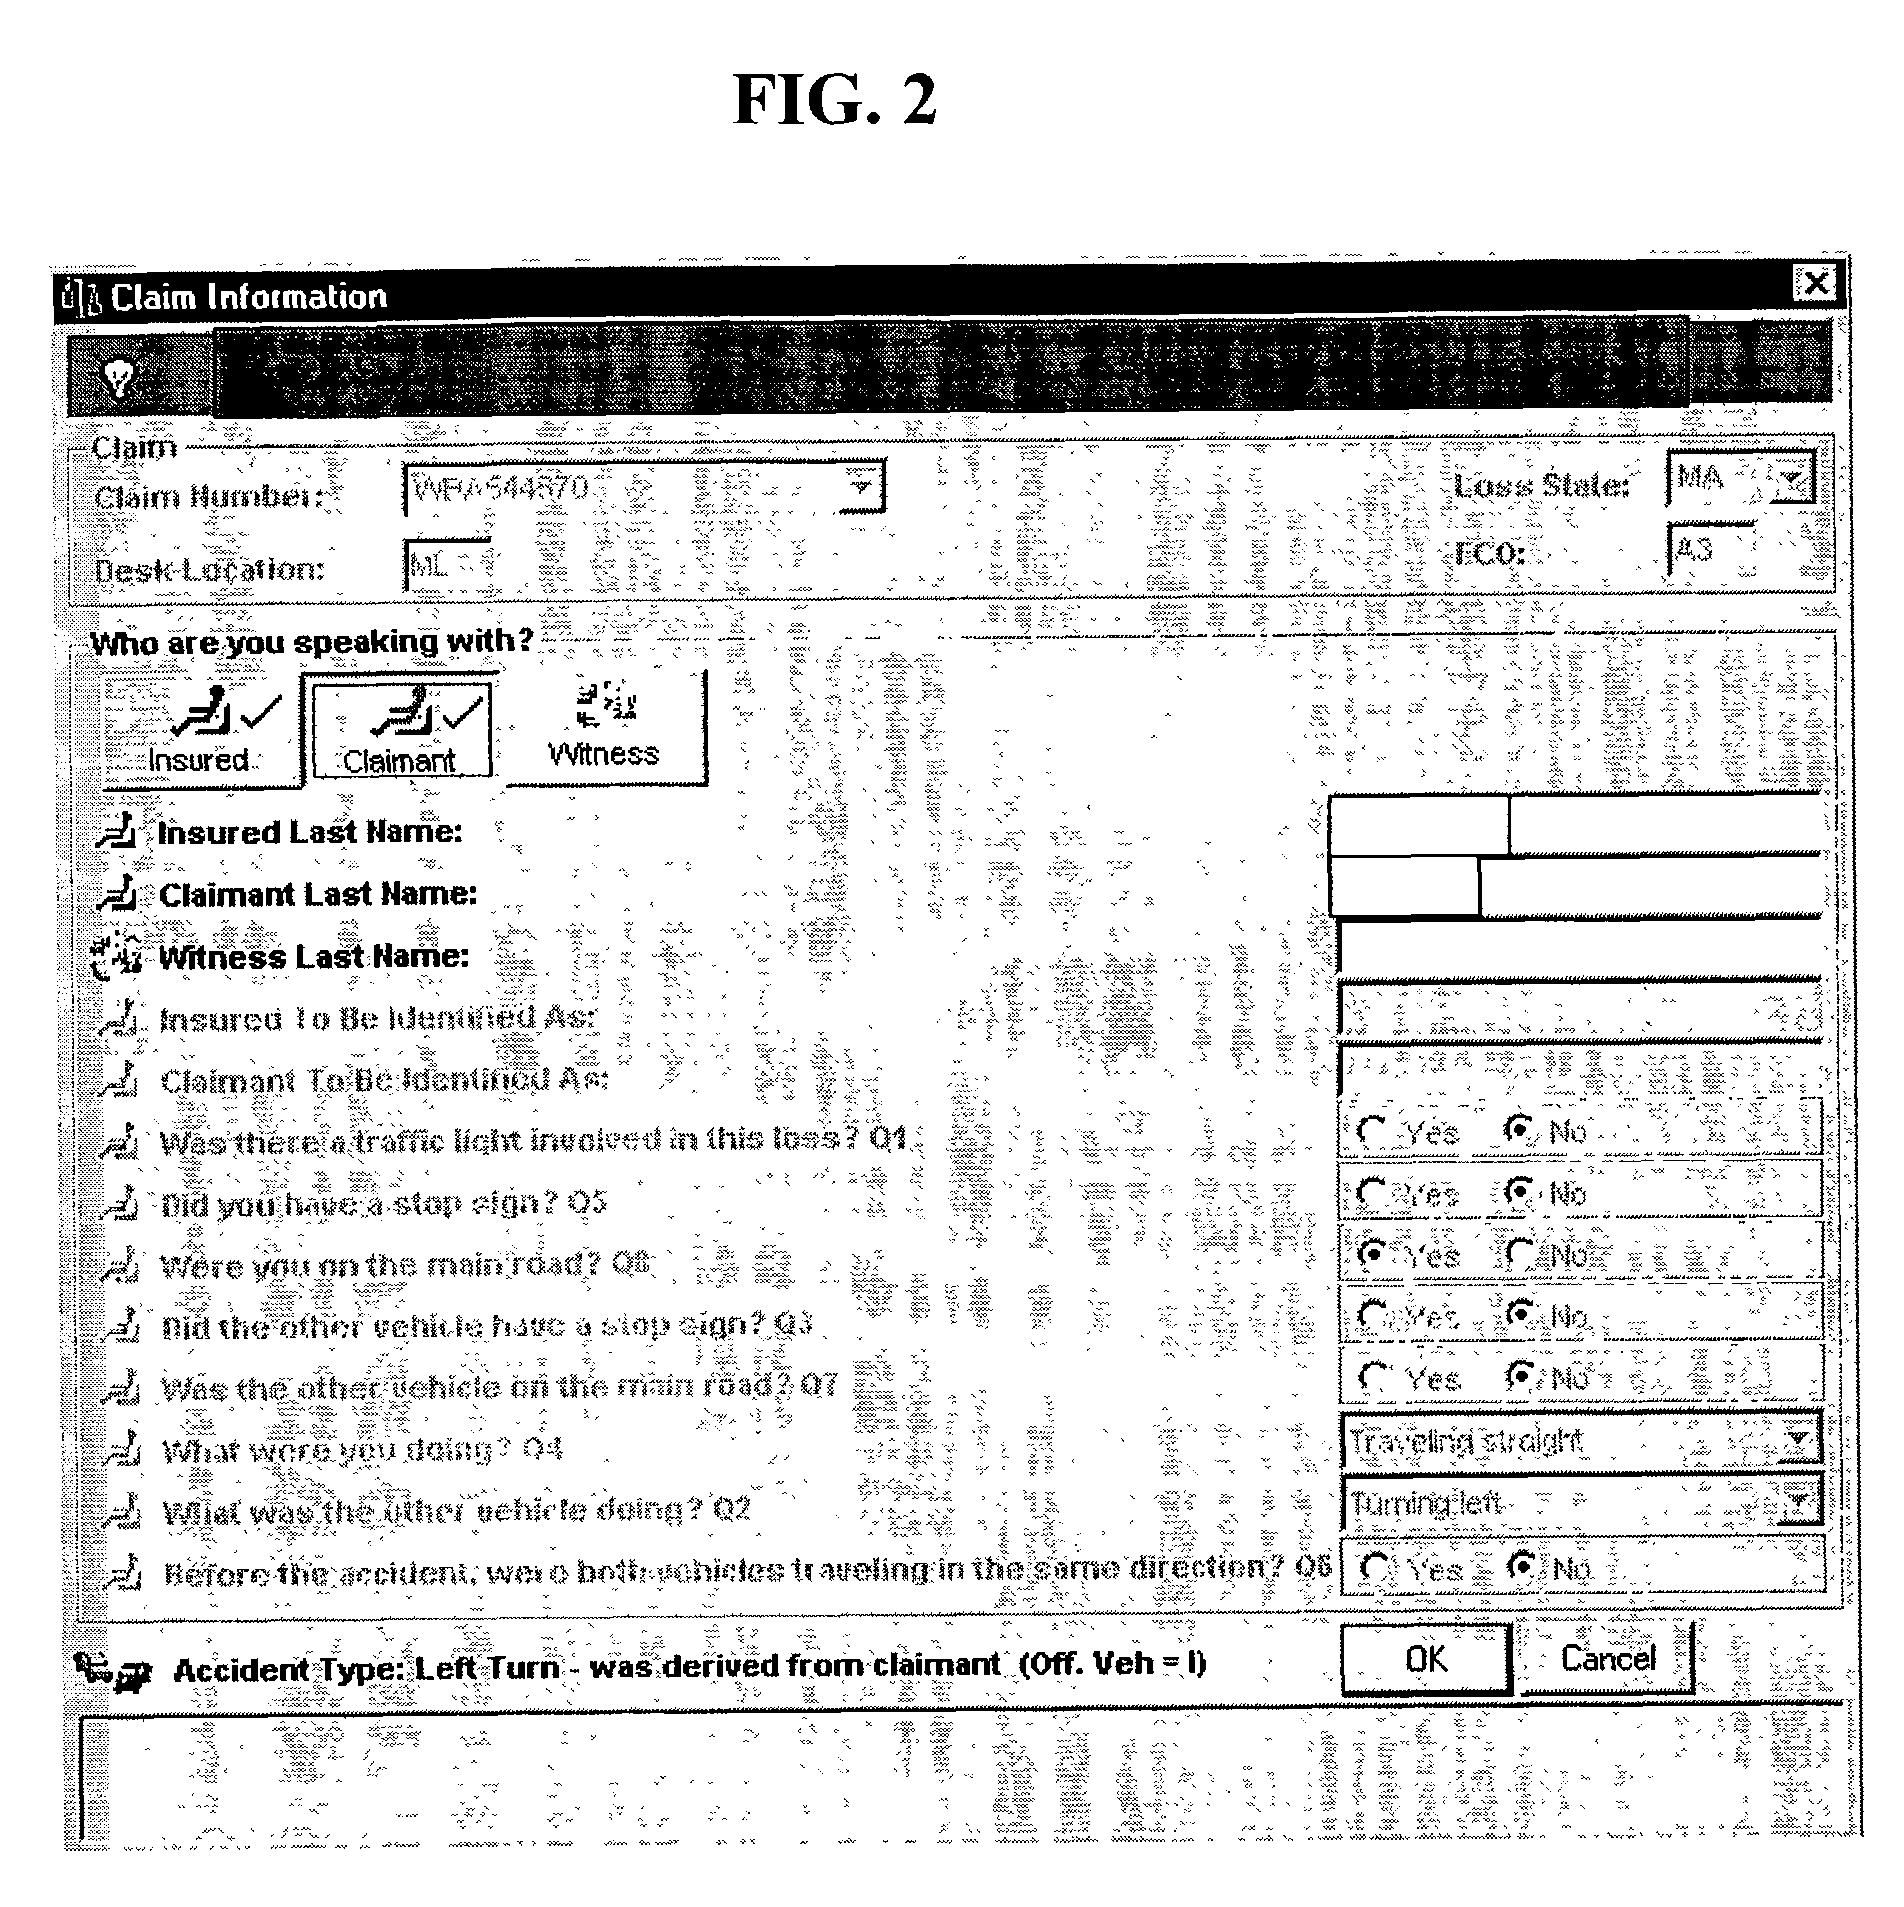 System and method for identifying and assessing comparative negligence in insurance claims